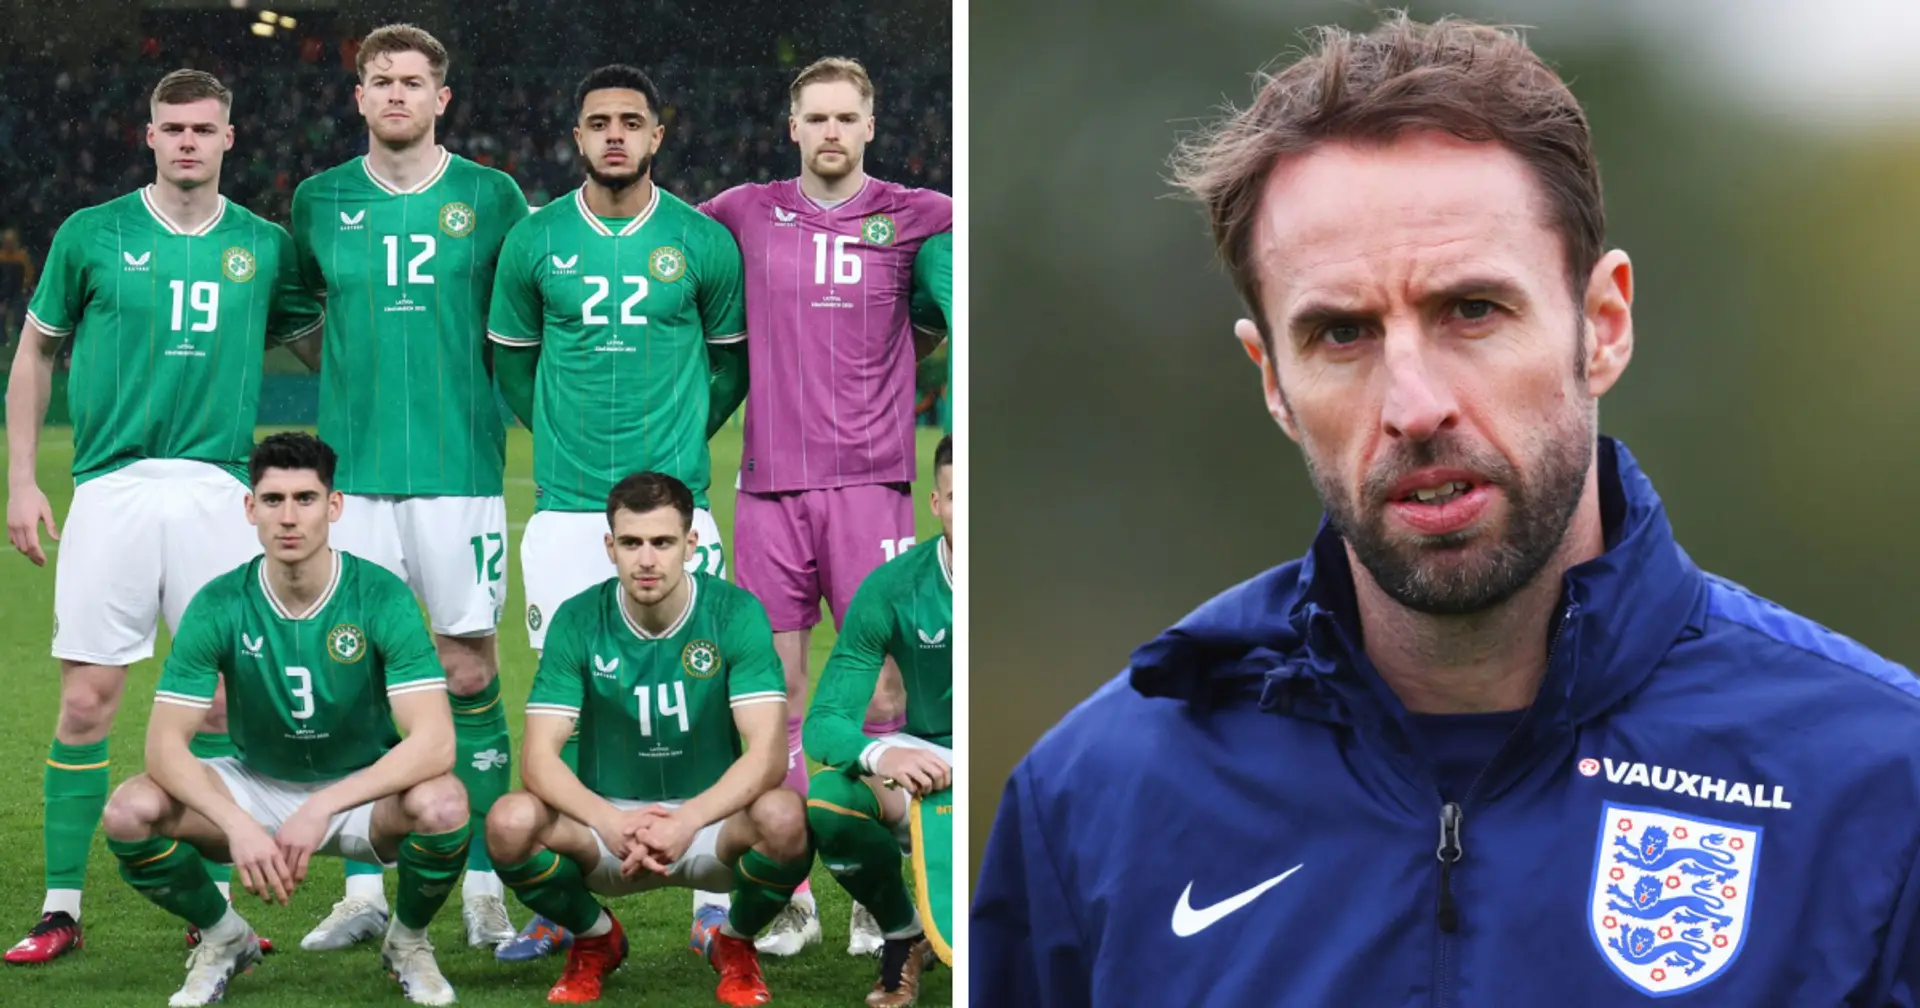 'He’s a bloody good player': England tried to convince Irish player to play for their team